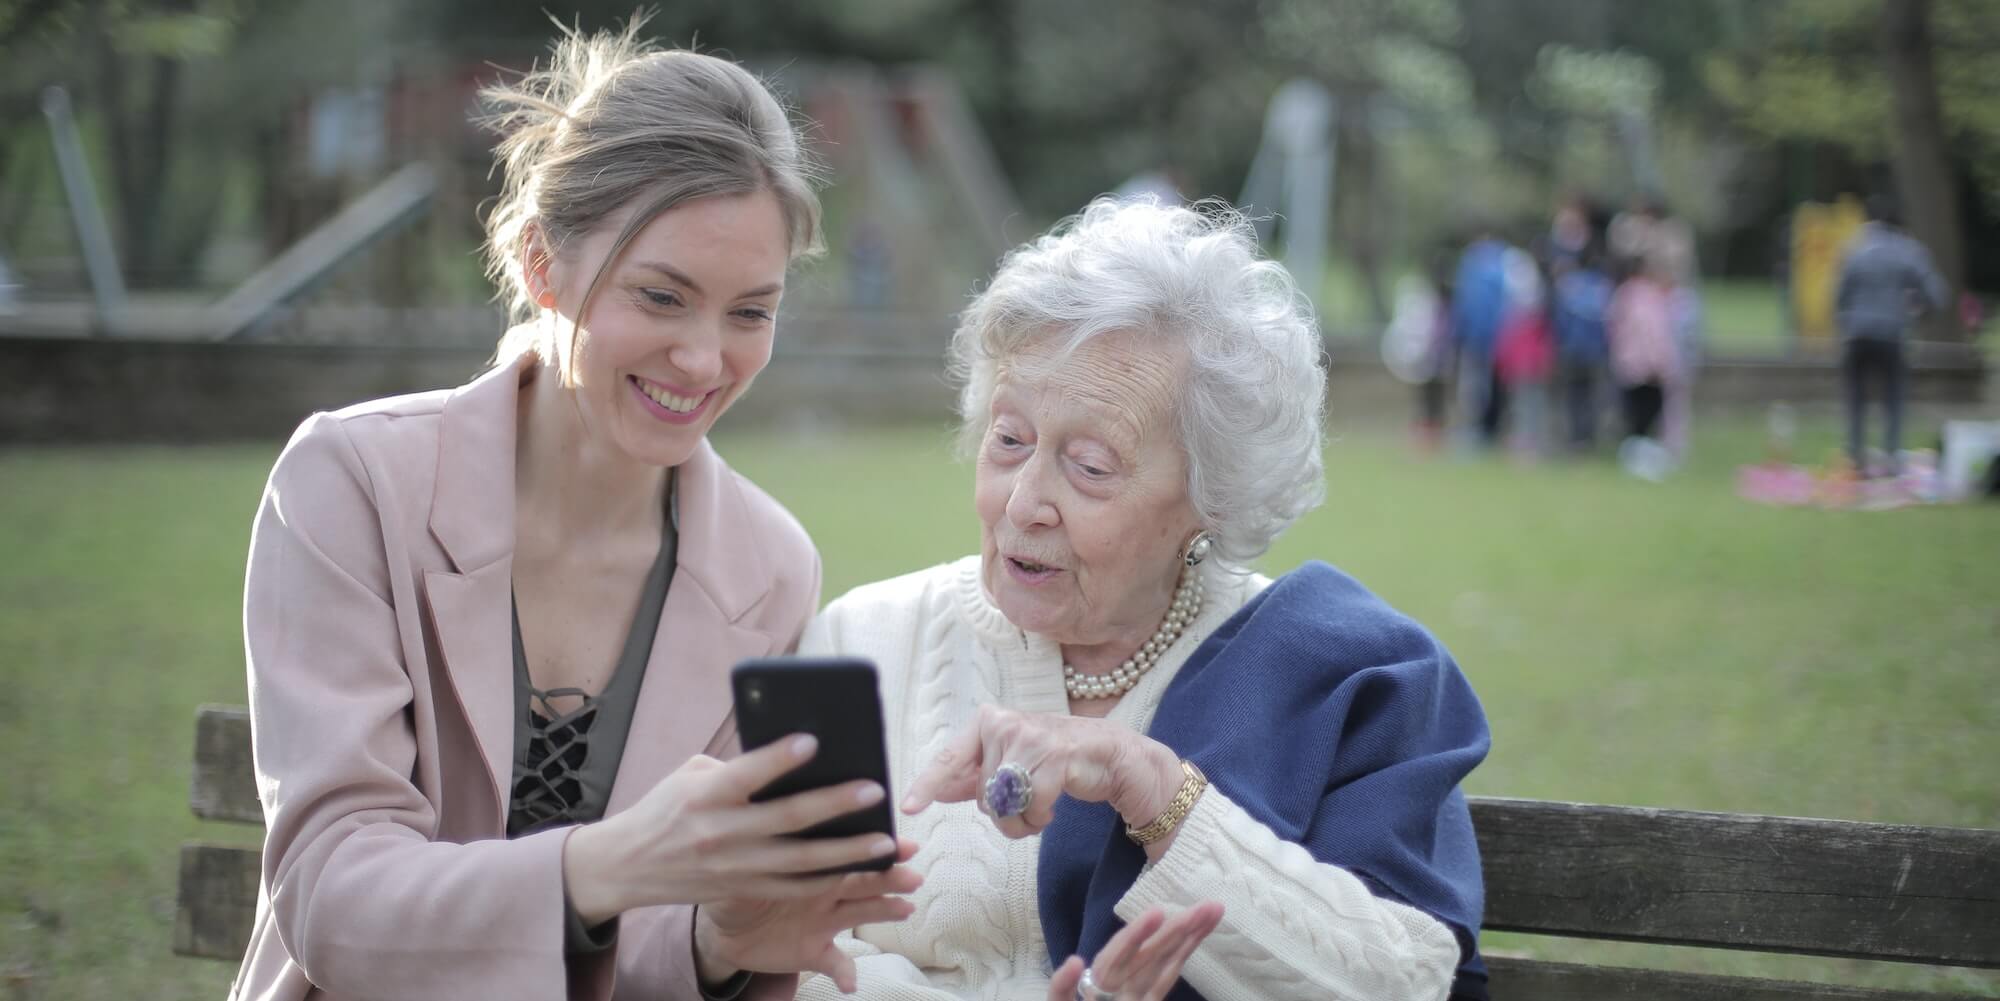 Photo showing a younger lady sitting with an elderly lady in a park, smiling looking at a phone. Image from Pexels (Photographer - Andrea Piacquadi)